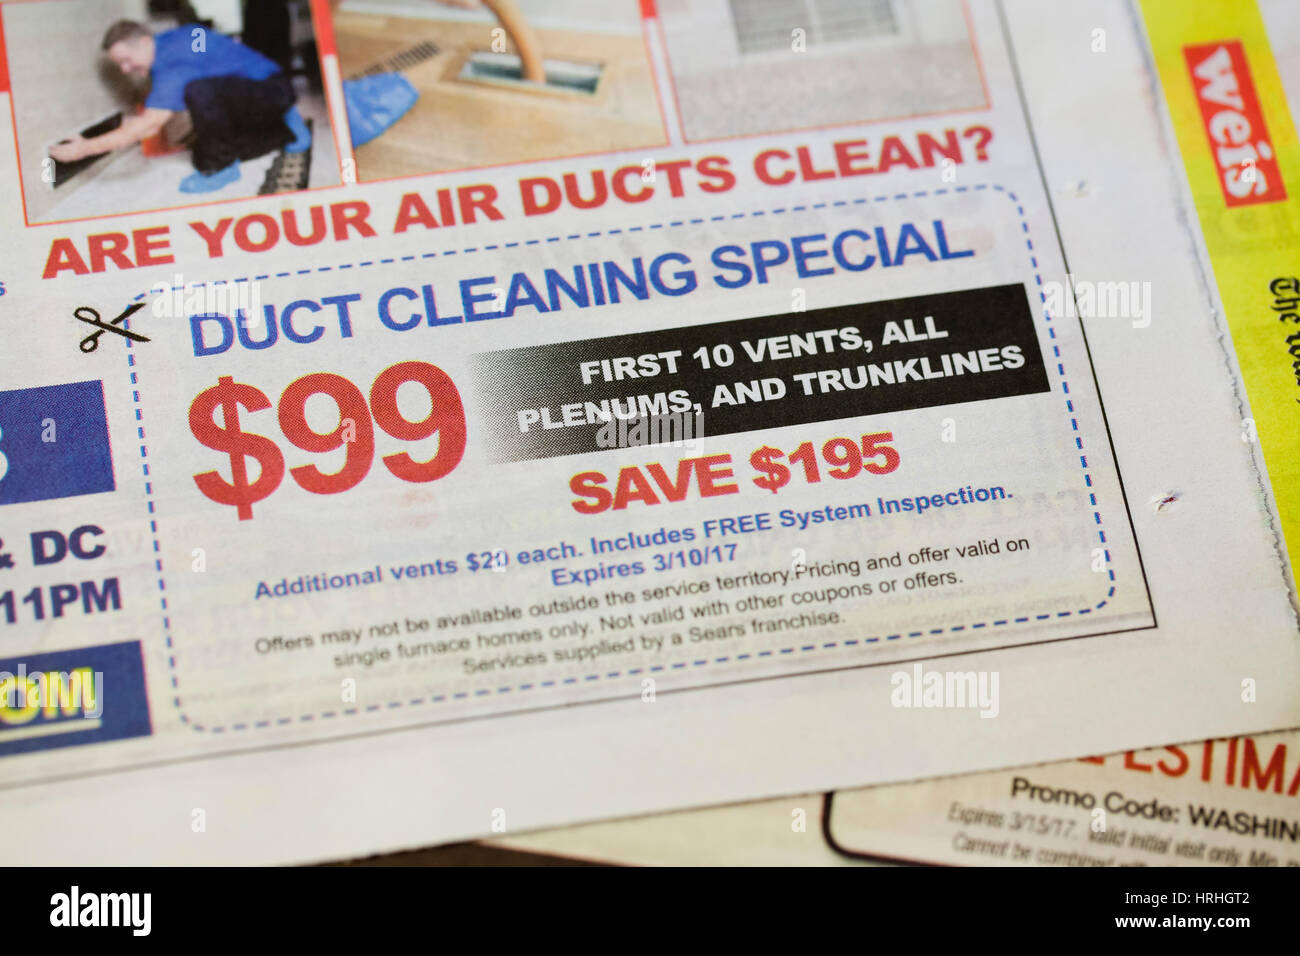 Air duct cleaning service coupon - USA Stock Photo